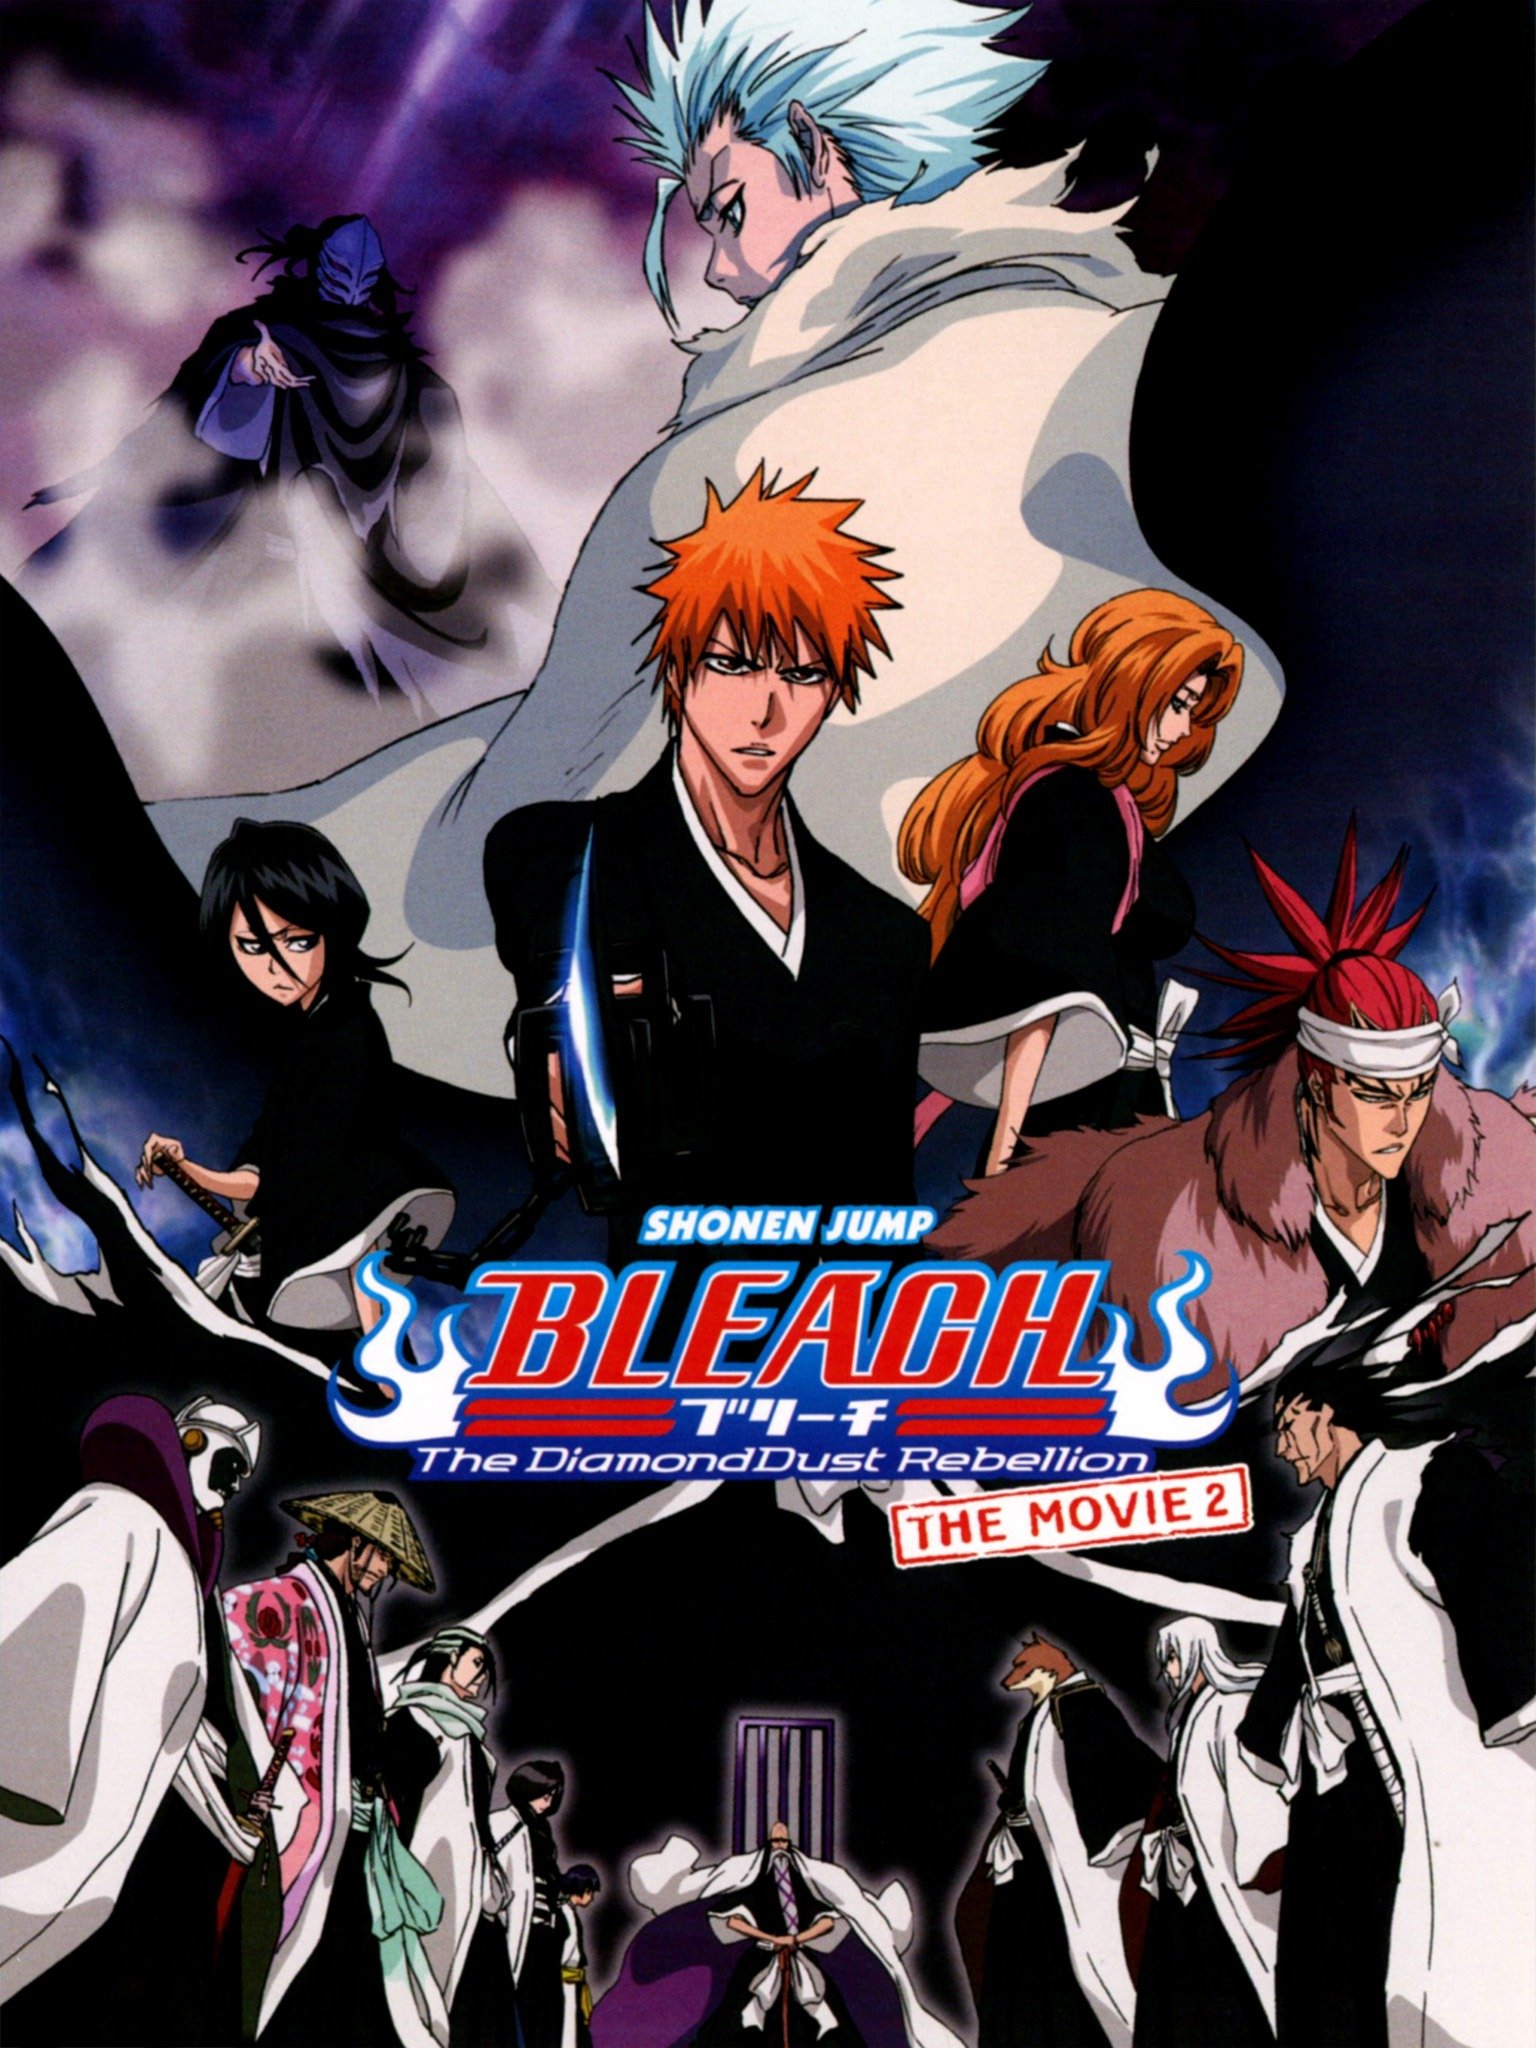 who forgets who in bleach memories of nobody